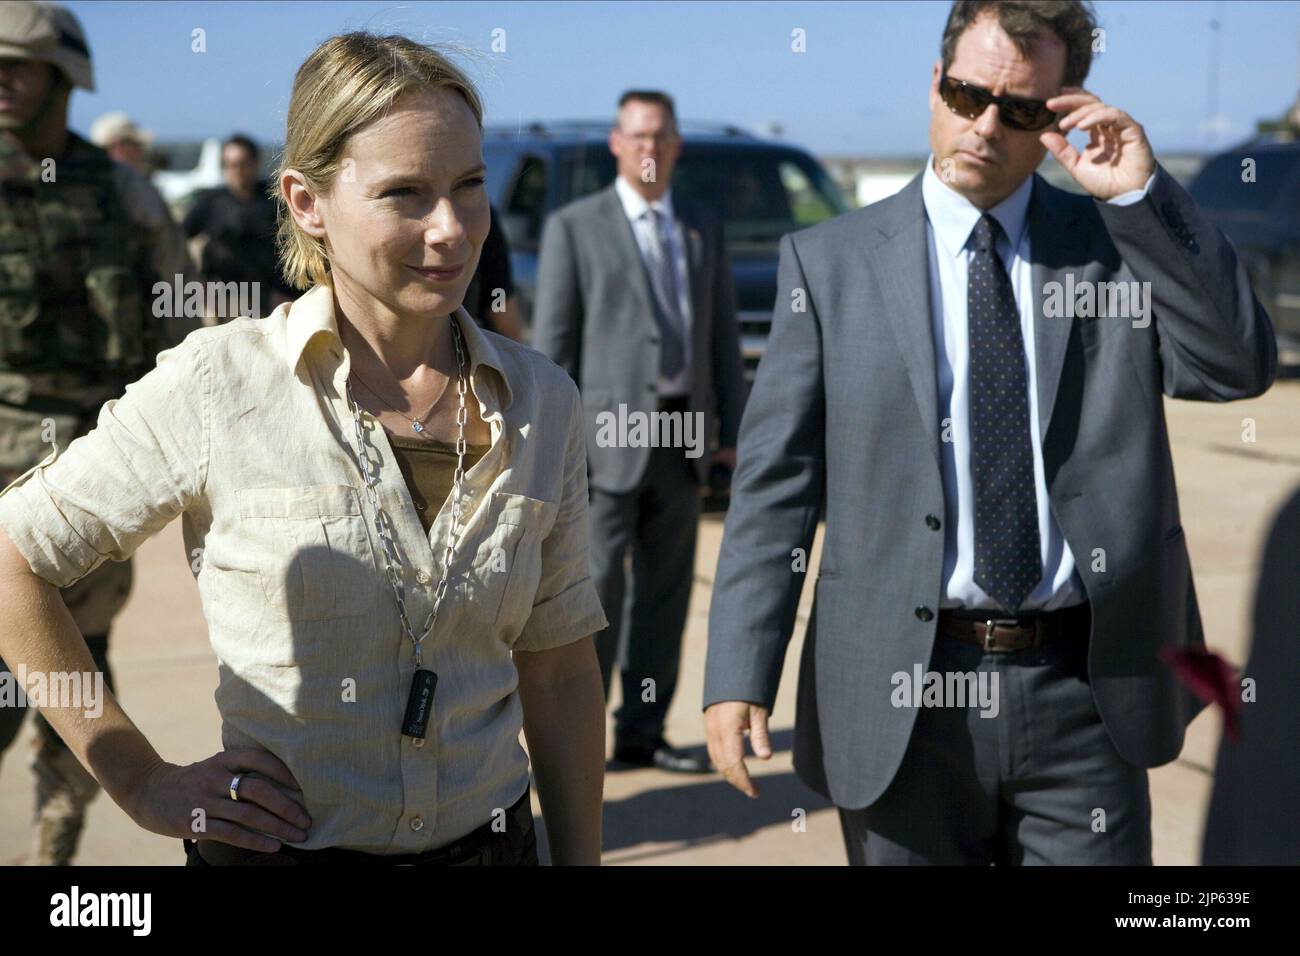 Amy Ryan: From 'The Office' To The 'Green Zone' : NPR